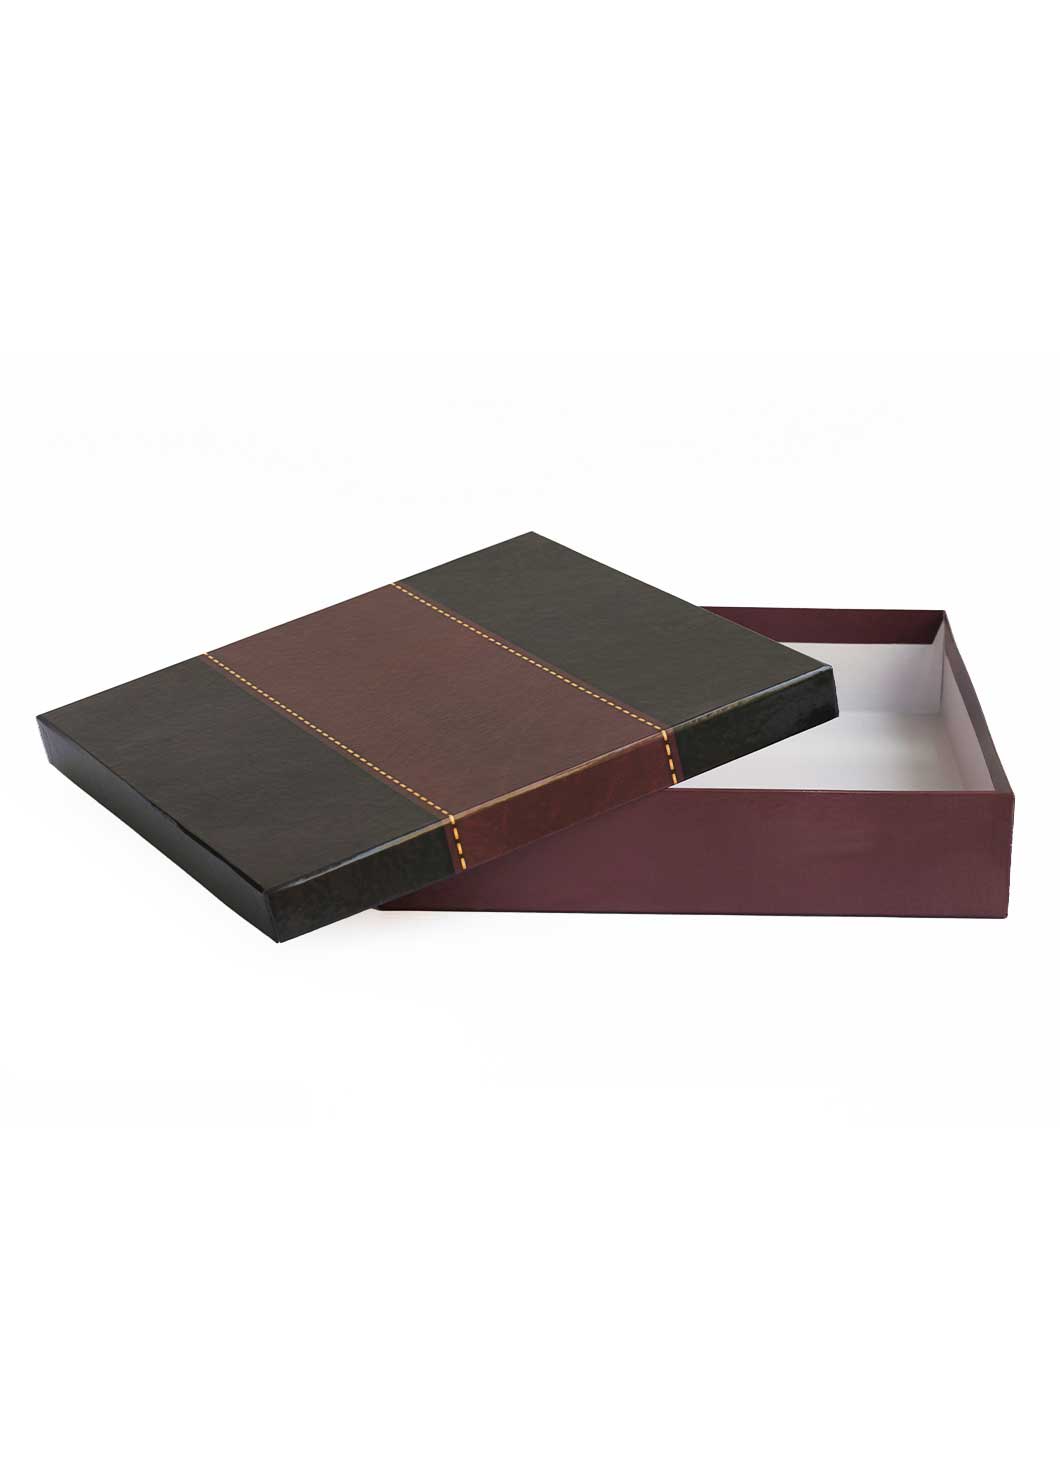 Leather Style Designed Empty Box - Black And Maroon Box For Clothe Packaging - Empty Designed Box